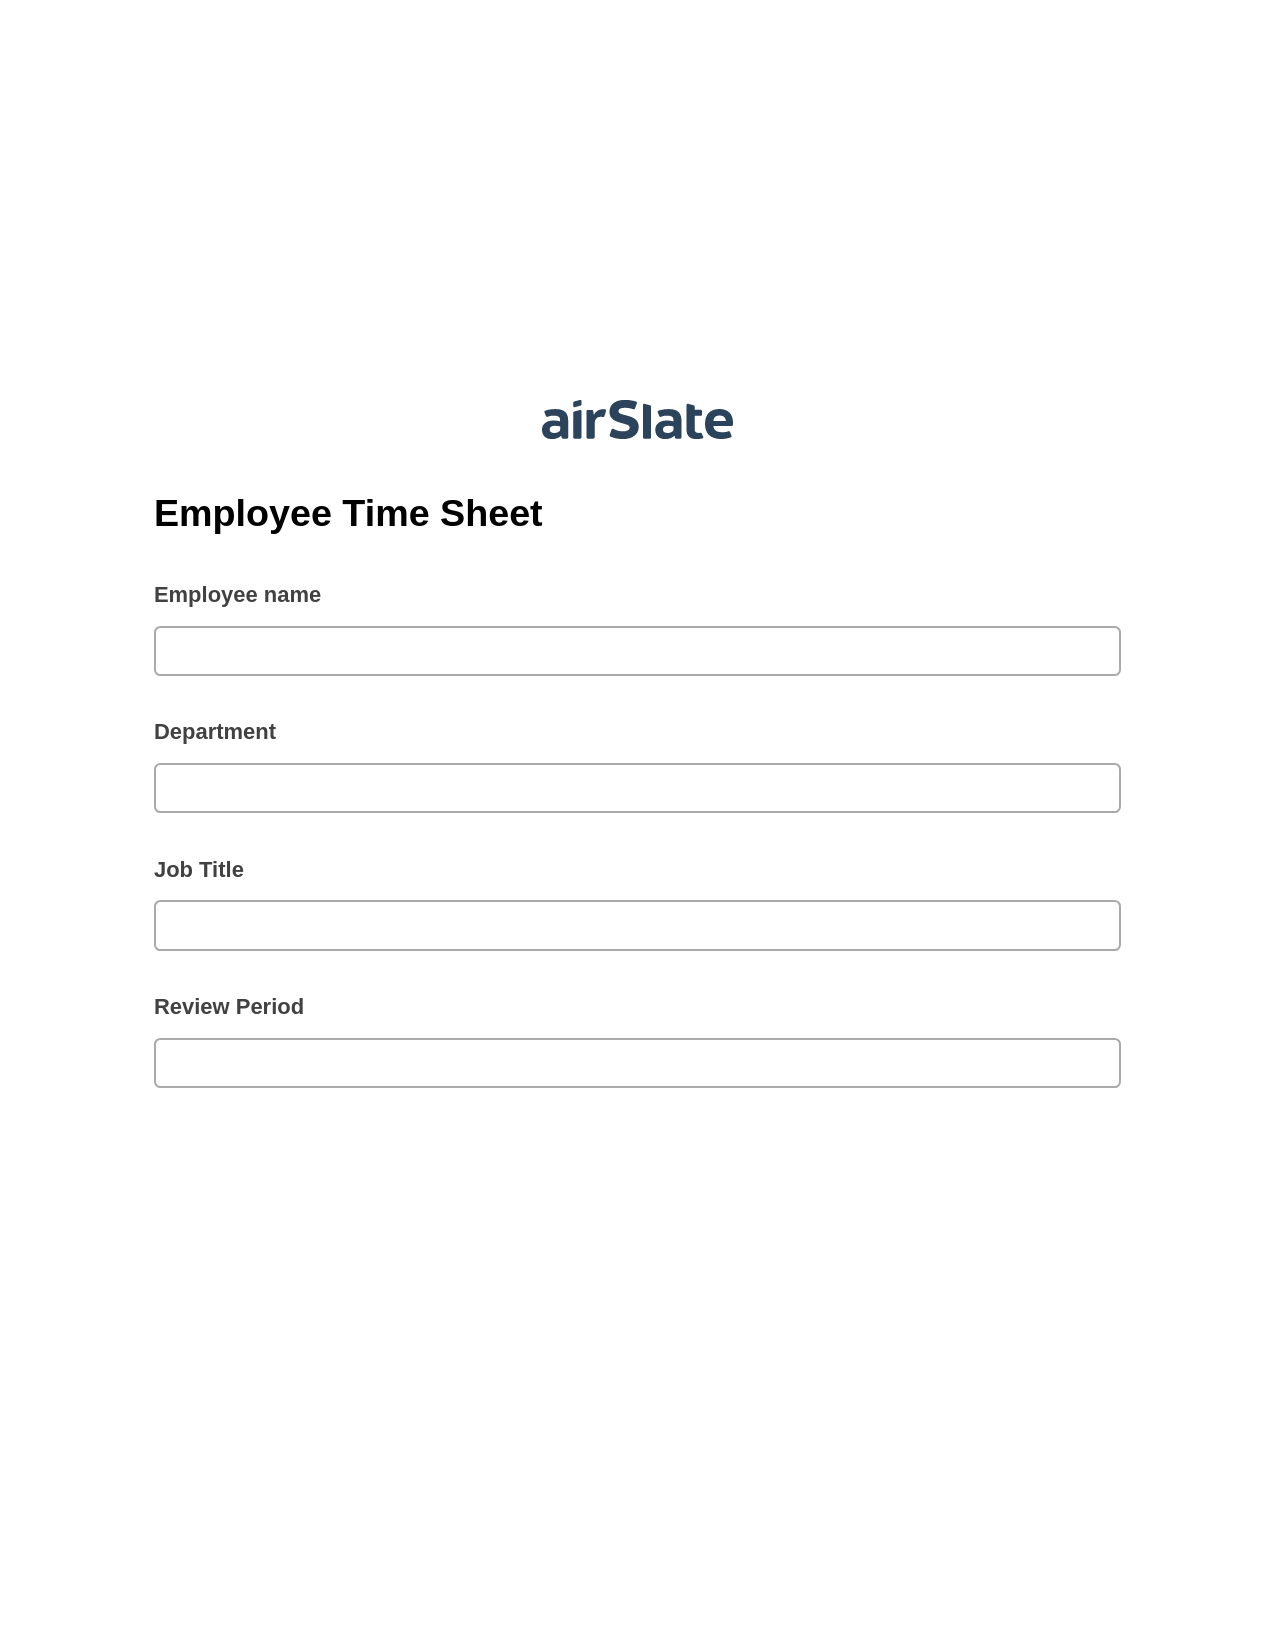 Employee Time Sheet Pre-fill from Excel Spreadsheet Bot, Create Salesforce Records Bot, Export to Excel 365 Bot